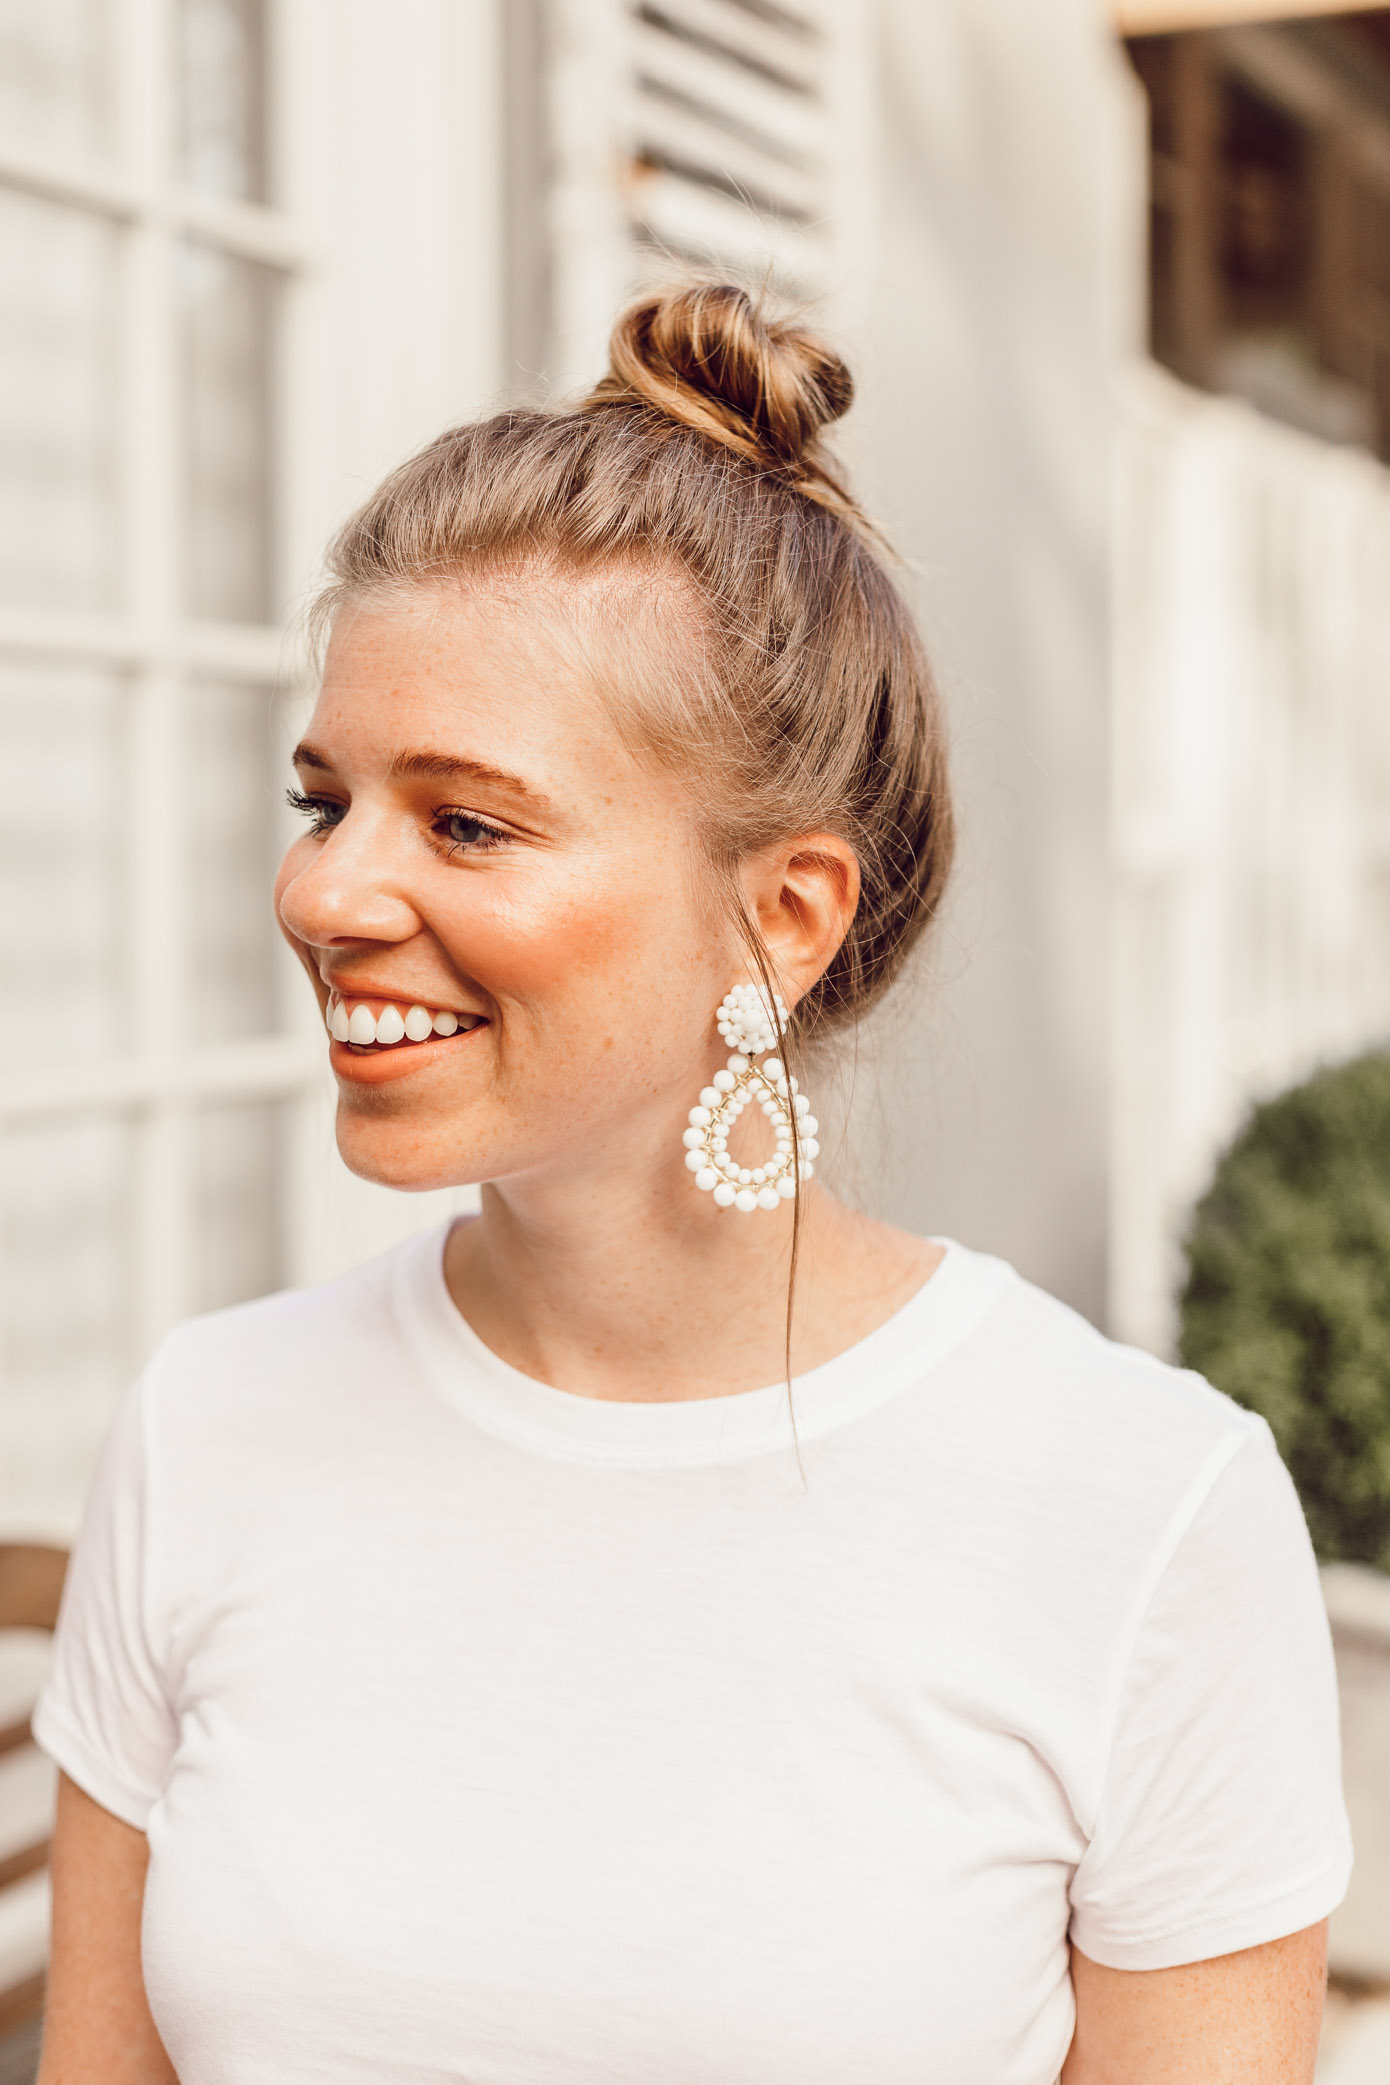 Step Out of Your Color Comfort Zone | Messy Topknot, Basic White Tee, White Statement Earrings styled on Louella Reese